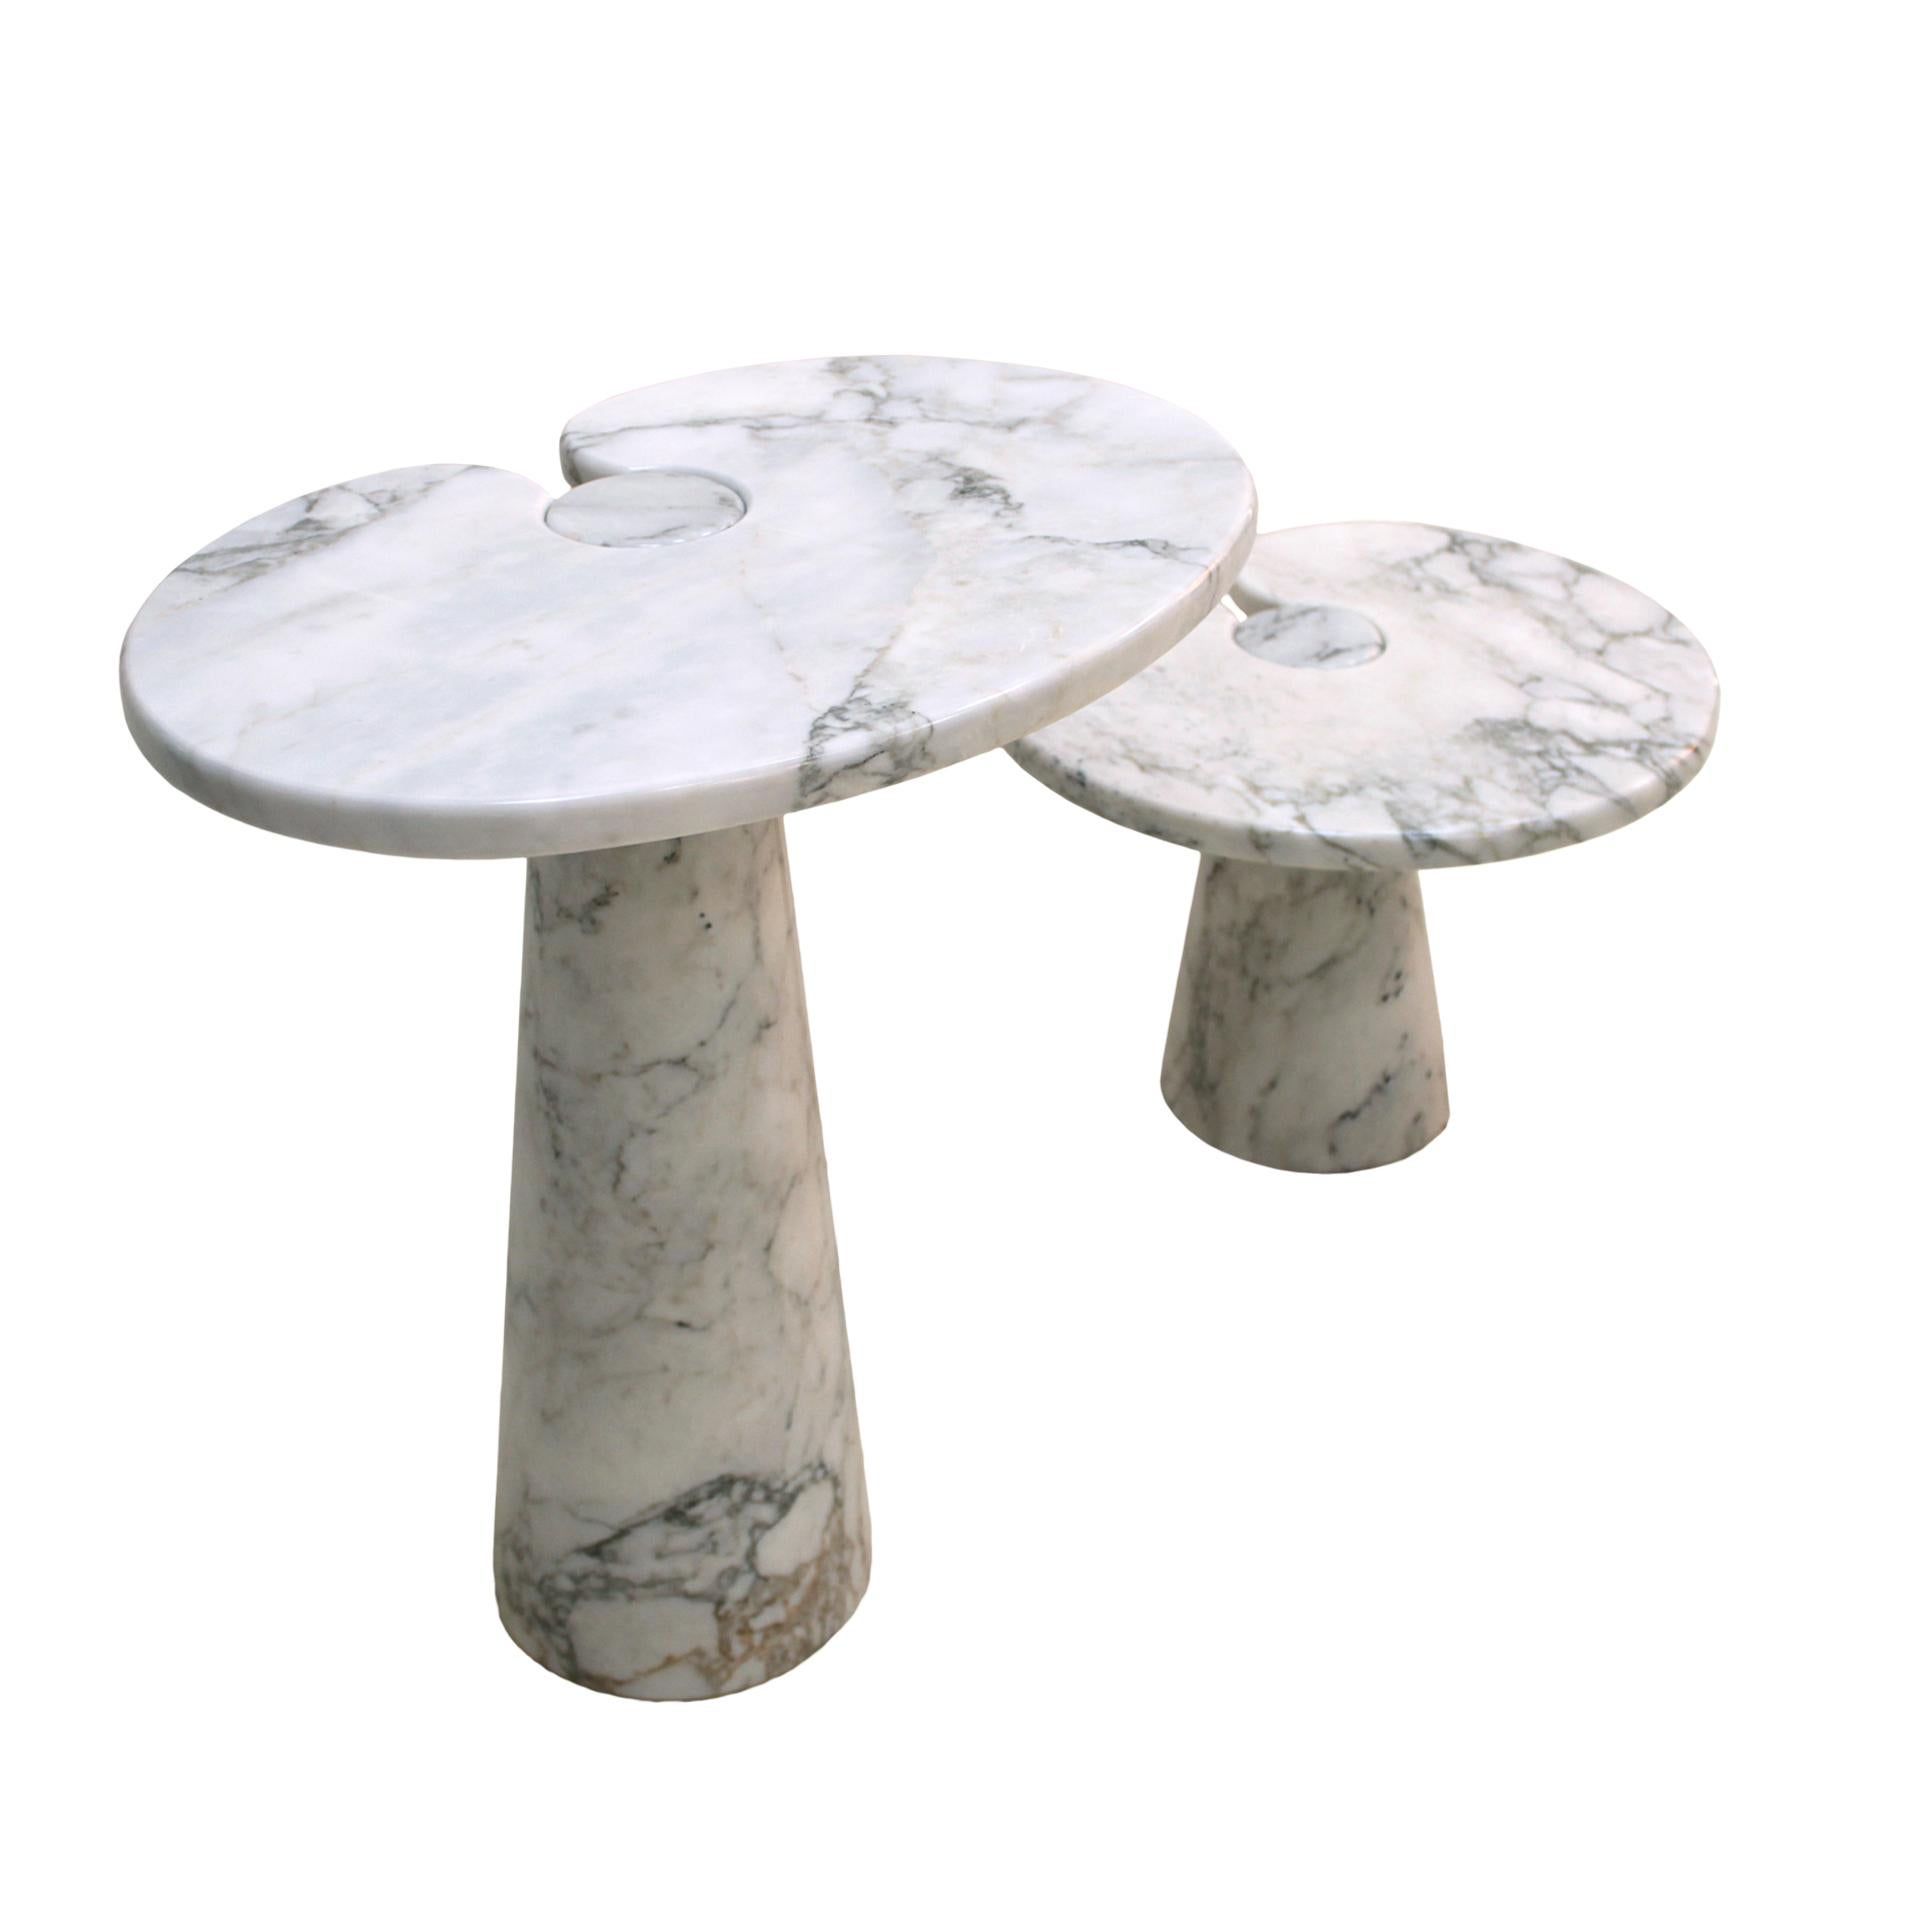 Pair of Arabescato marble side tables designed by Angelo Mangiarotti. The tables belong to the 